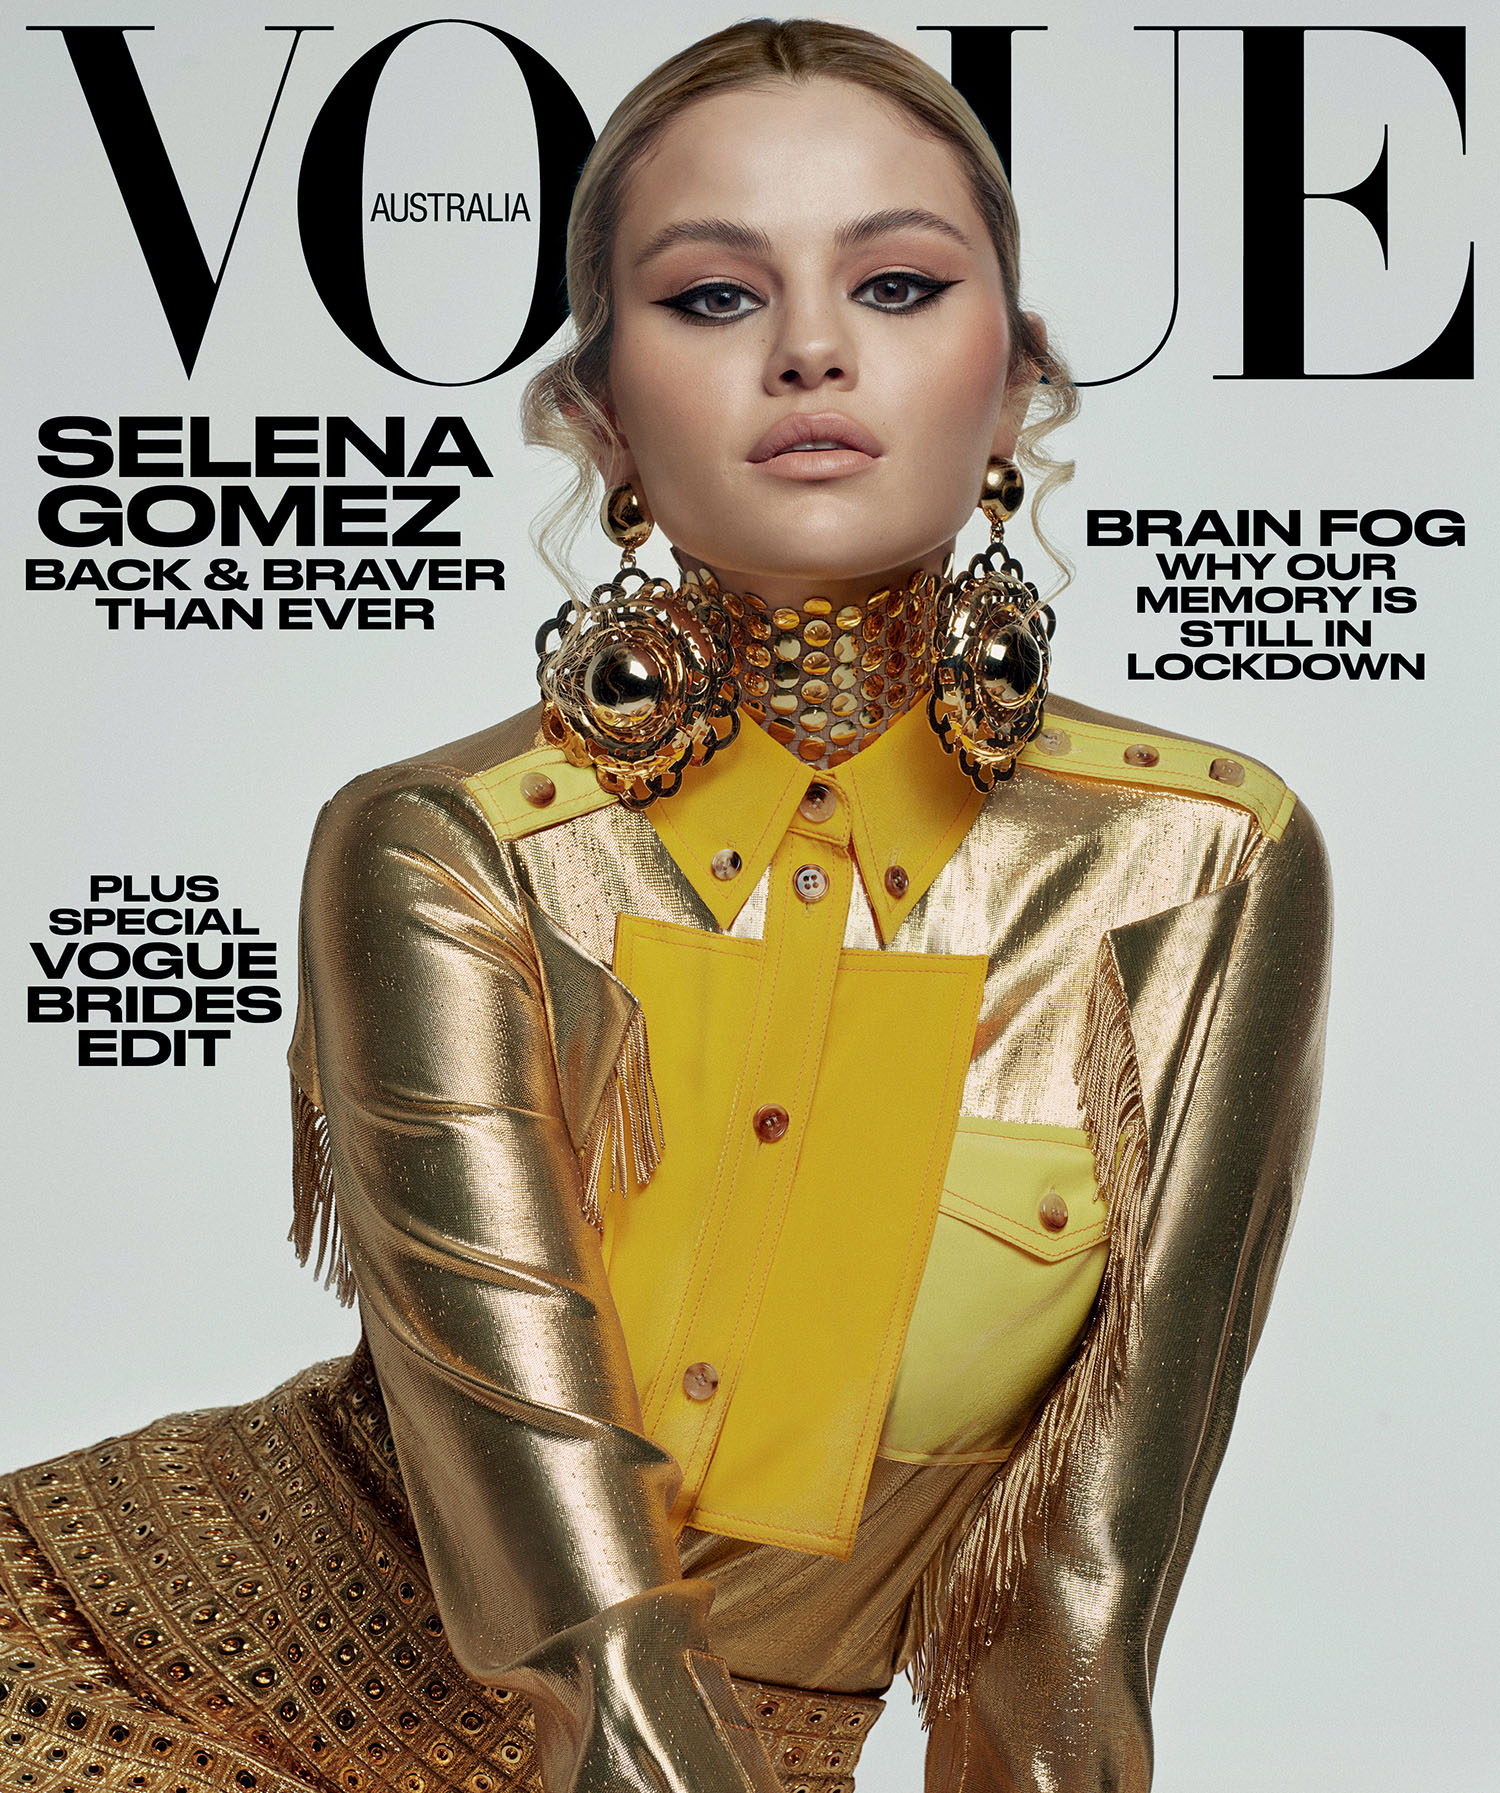 Selena Gomez covers Vogue Australia July 2021 and Vogue Singapore July August 2021 by Alique